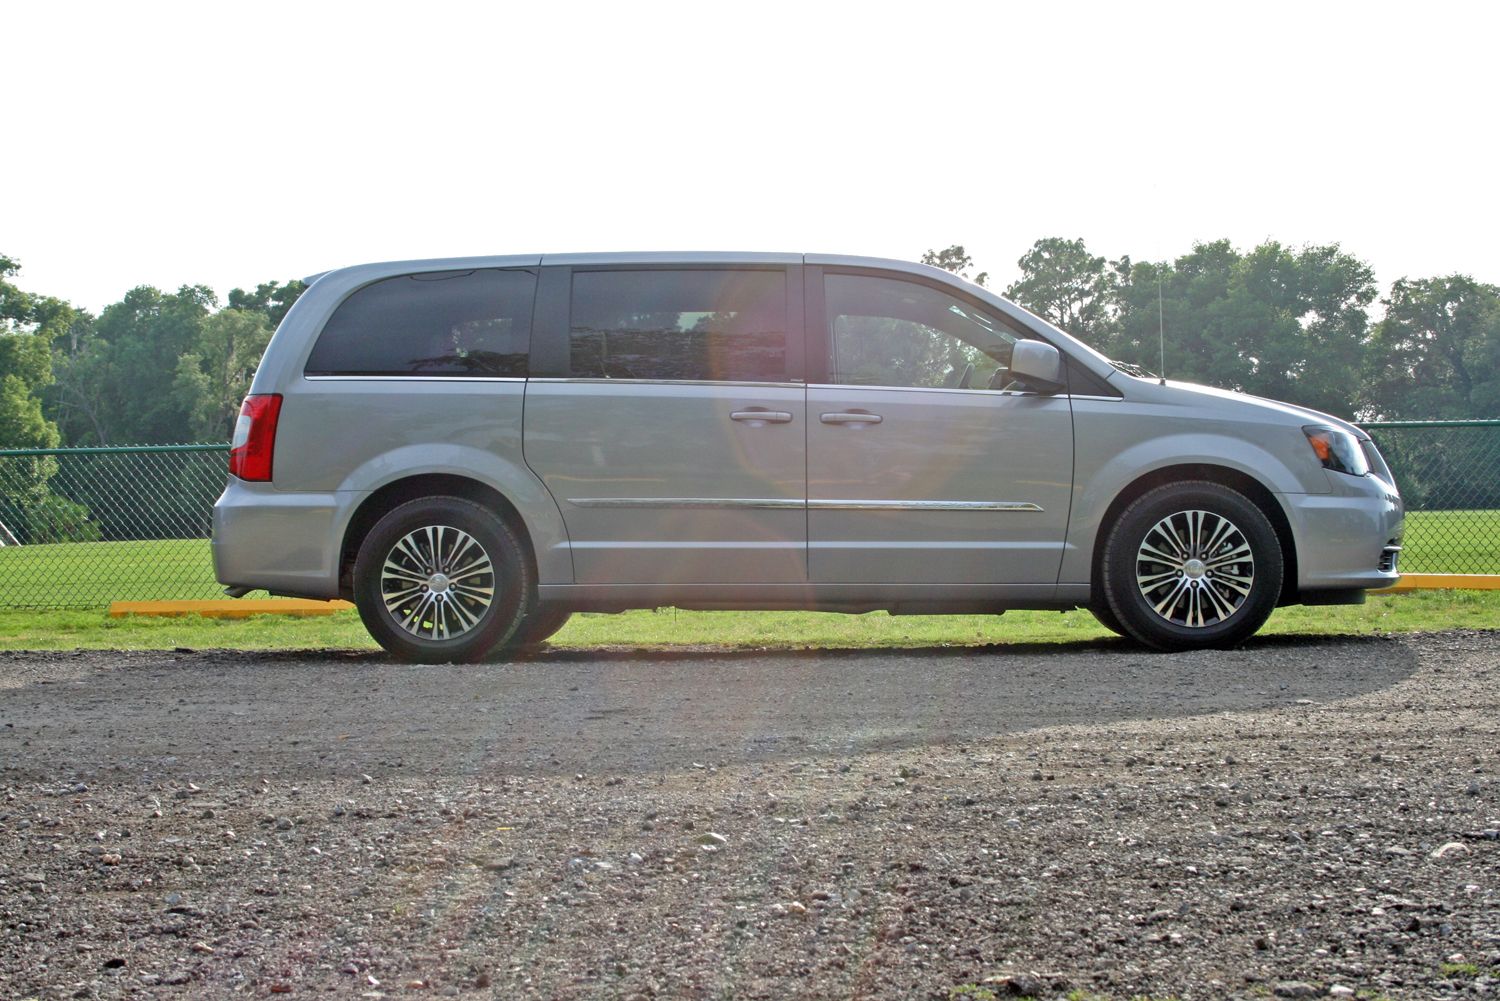 2014 Chrysler Town & Country S - Driven